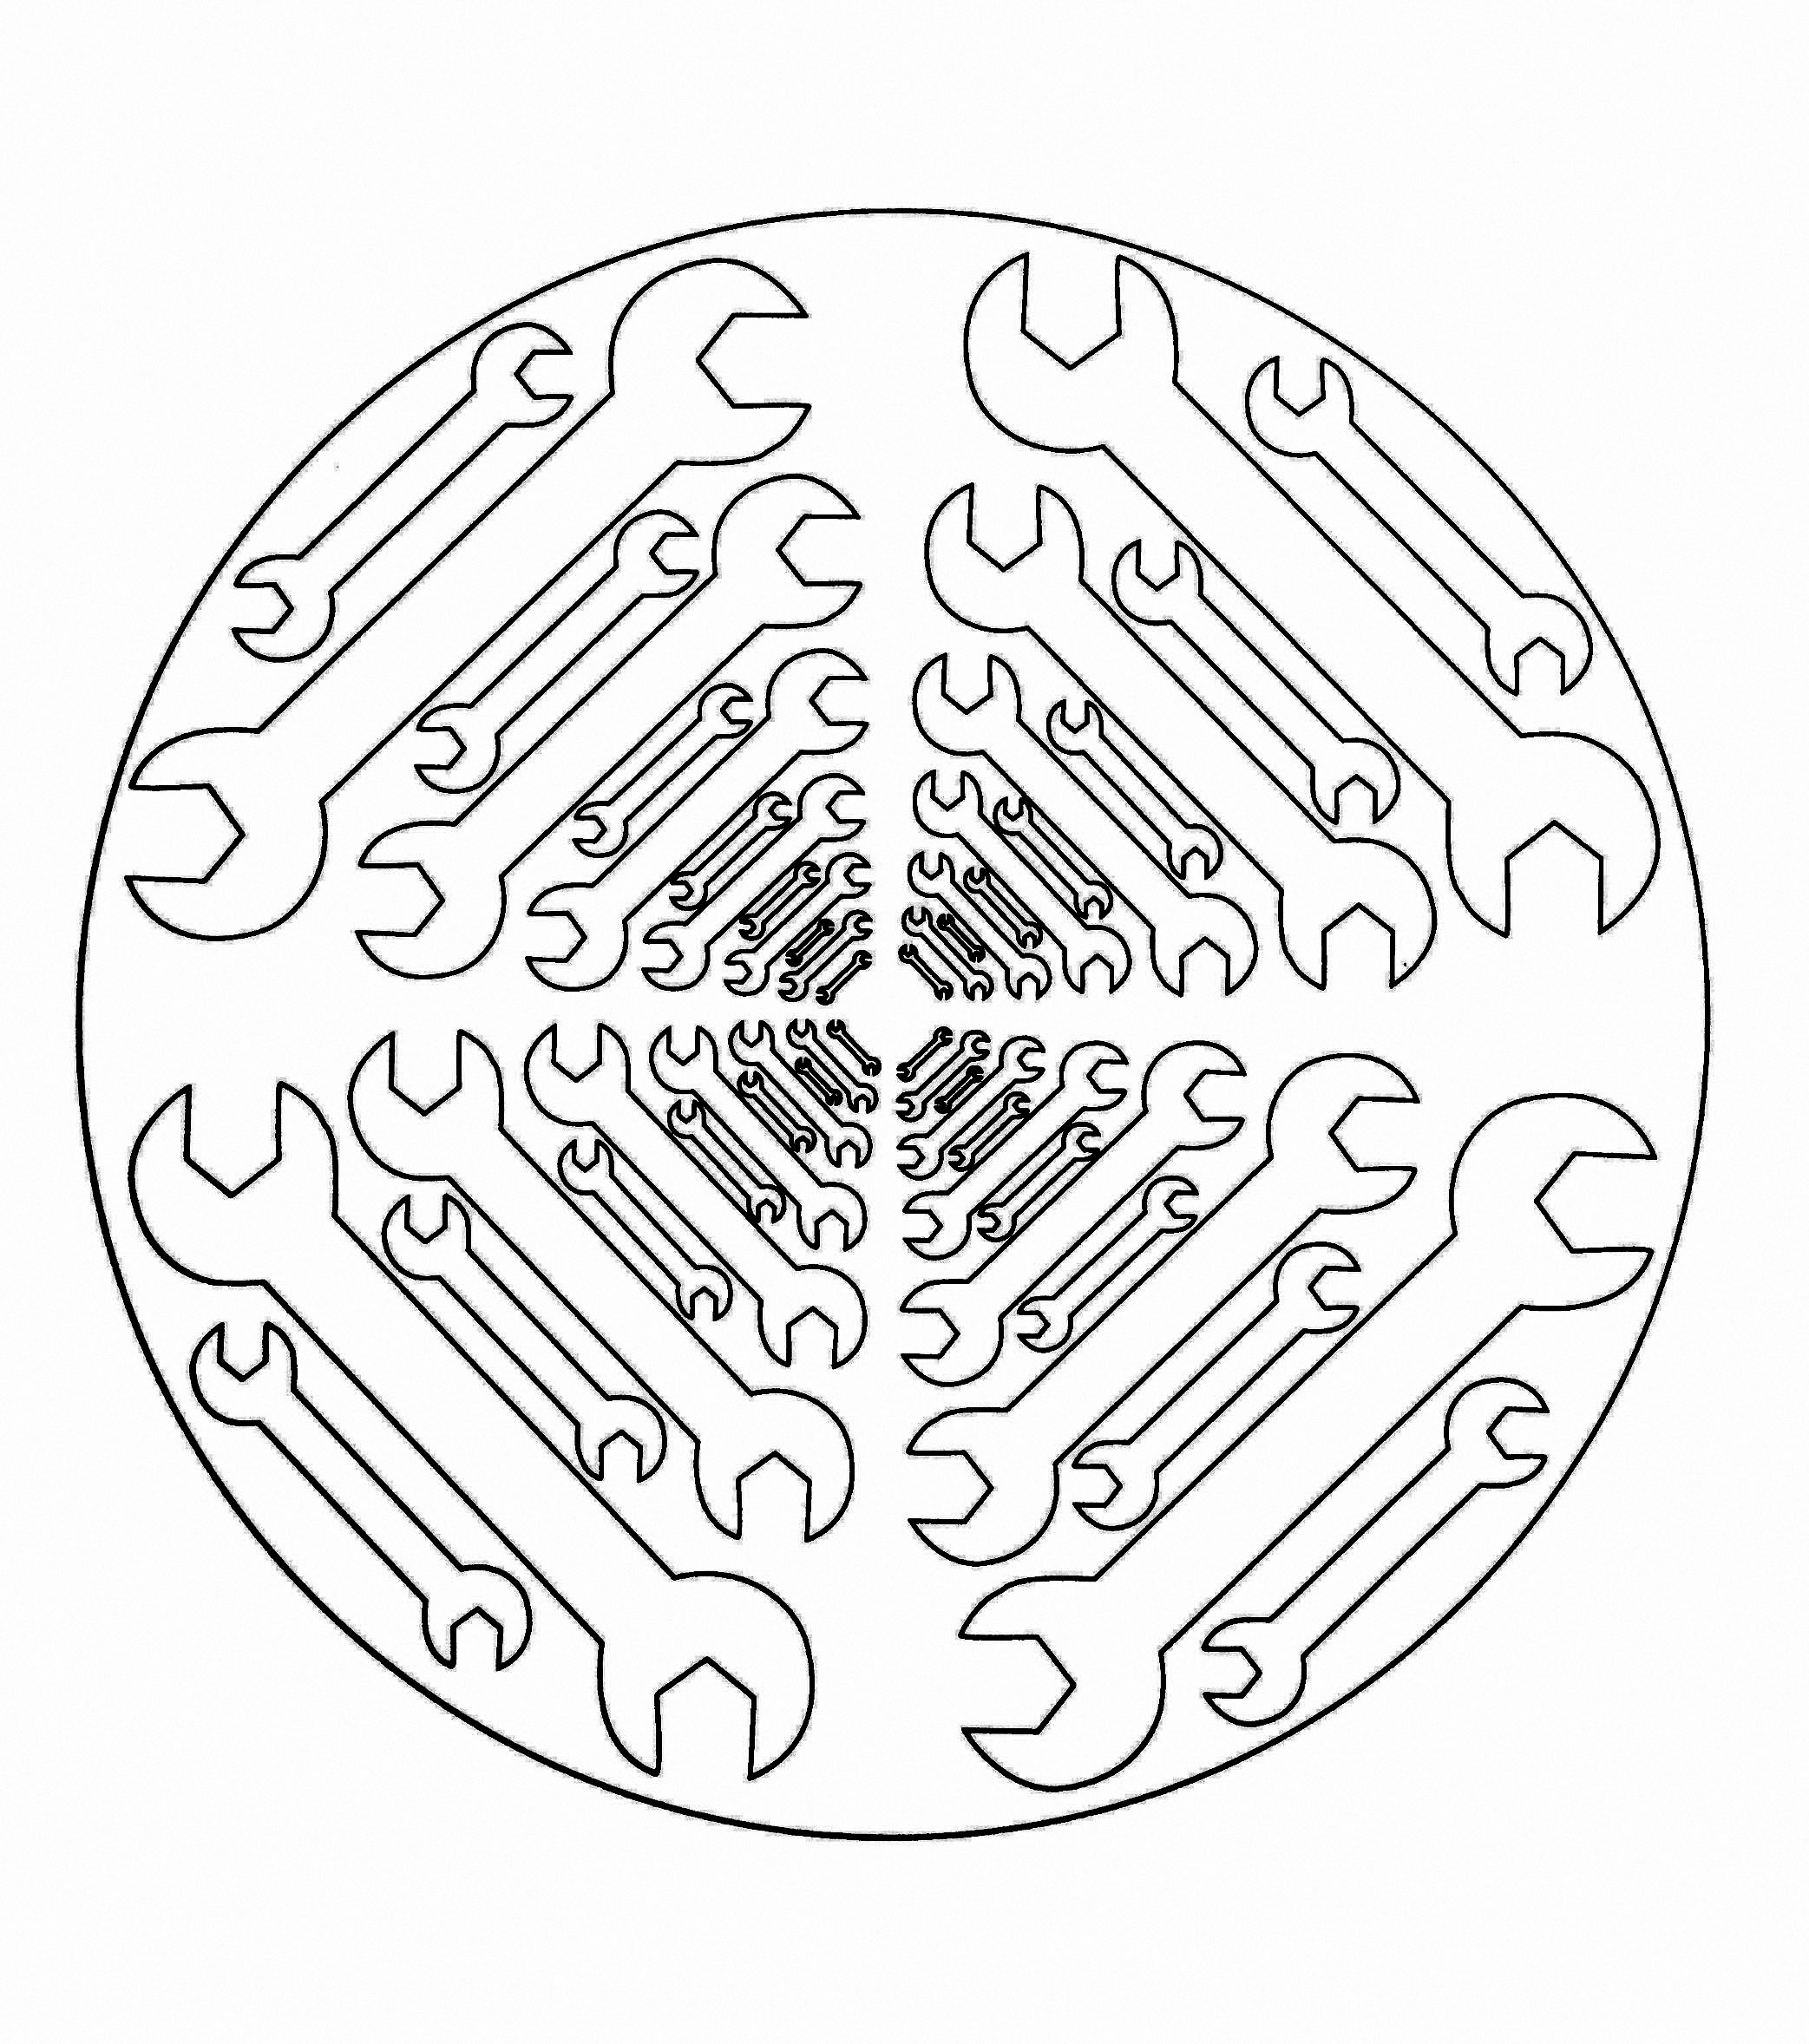 A perfect Mandala if you want simplicity or if you have little time to color. Feel free to let your instincts decide where to color, and what colors to choose.